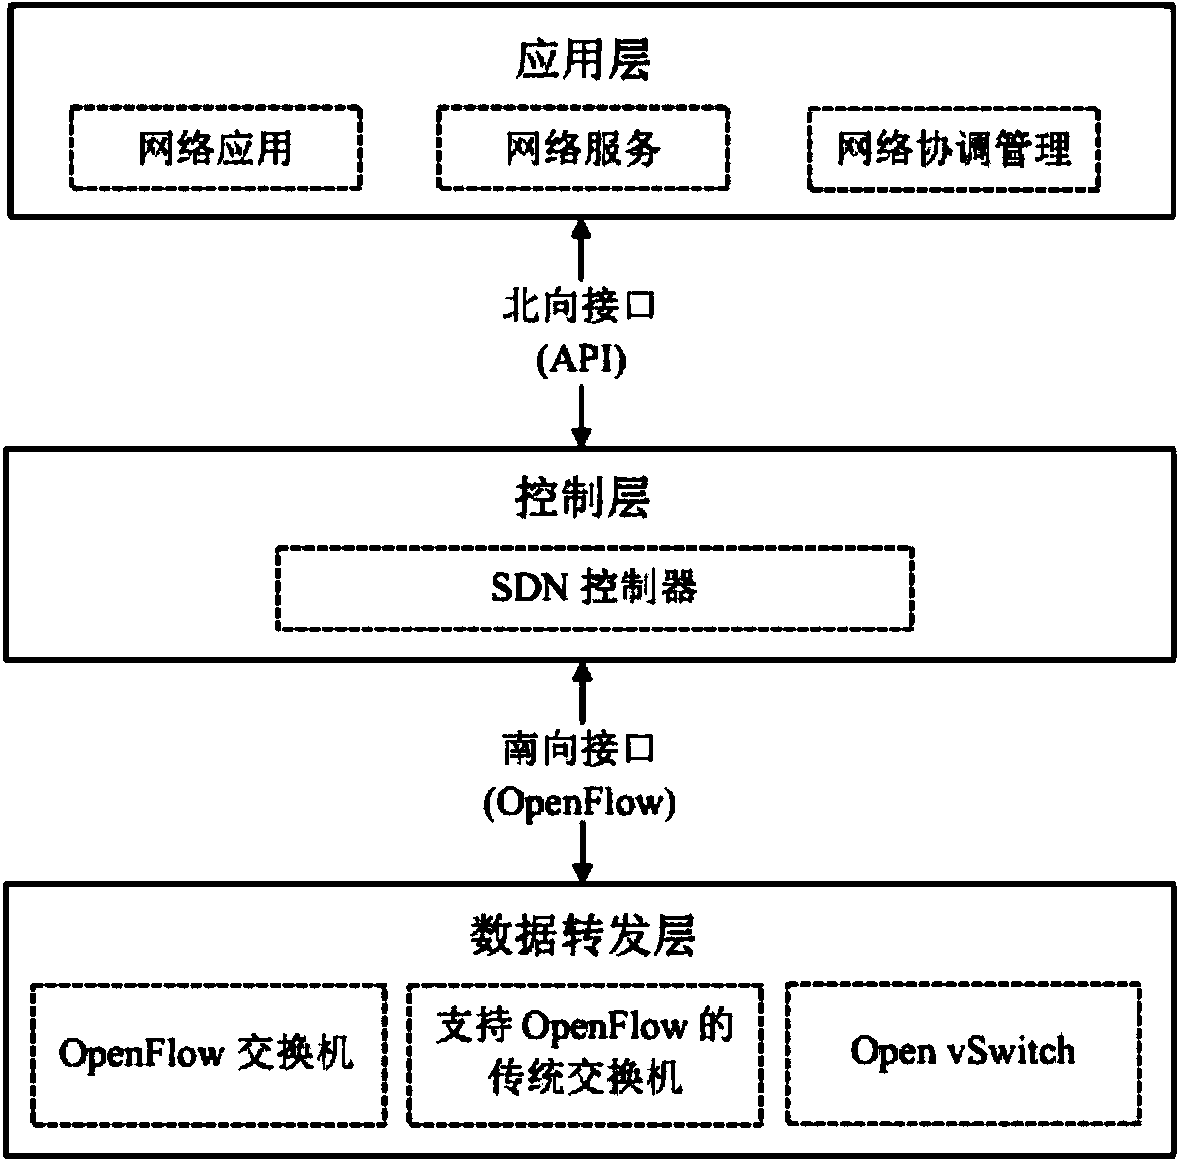 Policy conflict detection method and system for SDN (Software Defined Network) application